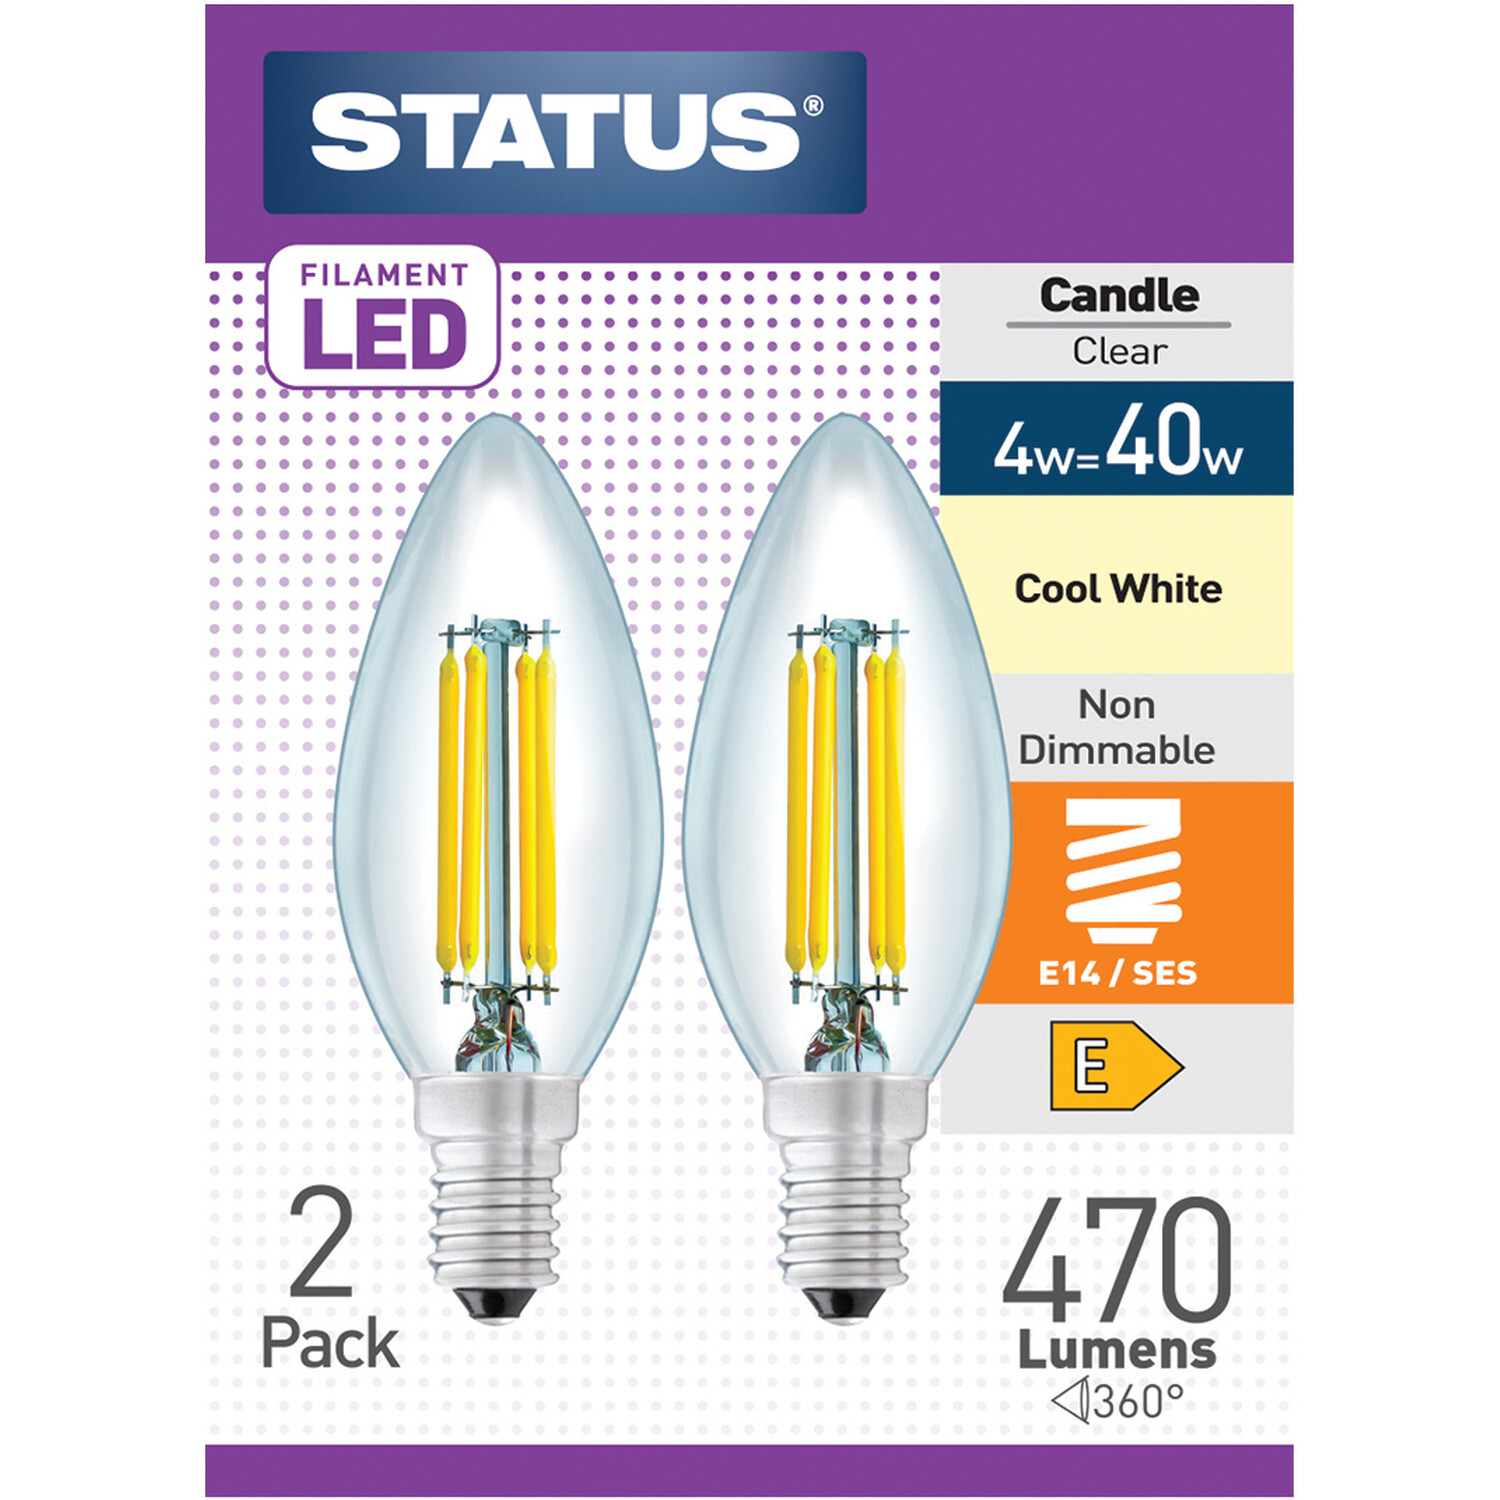 Pack of 2 Status Filament LED Cool White SES Candle Bulbs Image 1